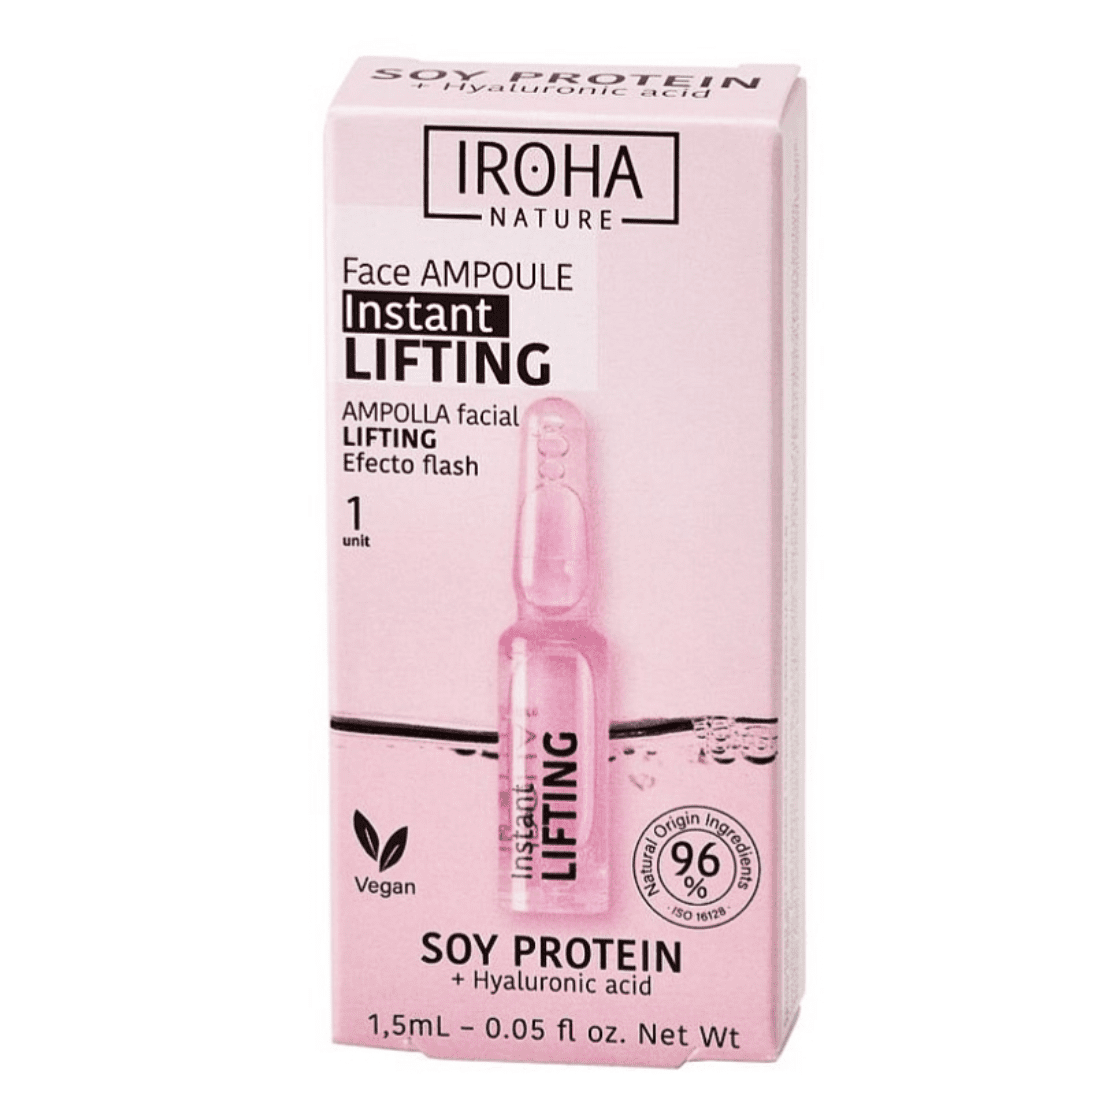 Iroha Instant Flash Lifting Face Ampoule